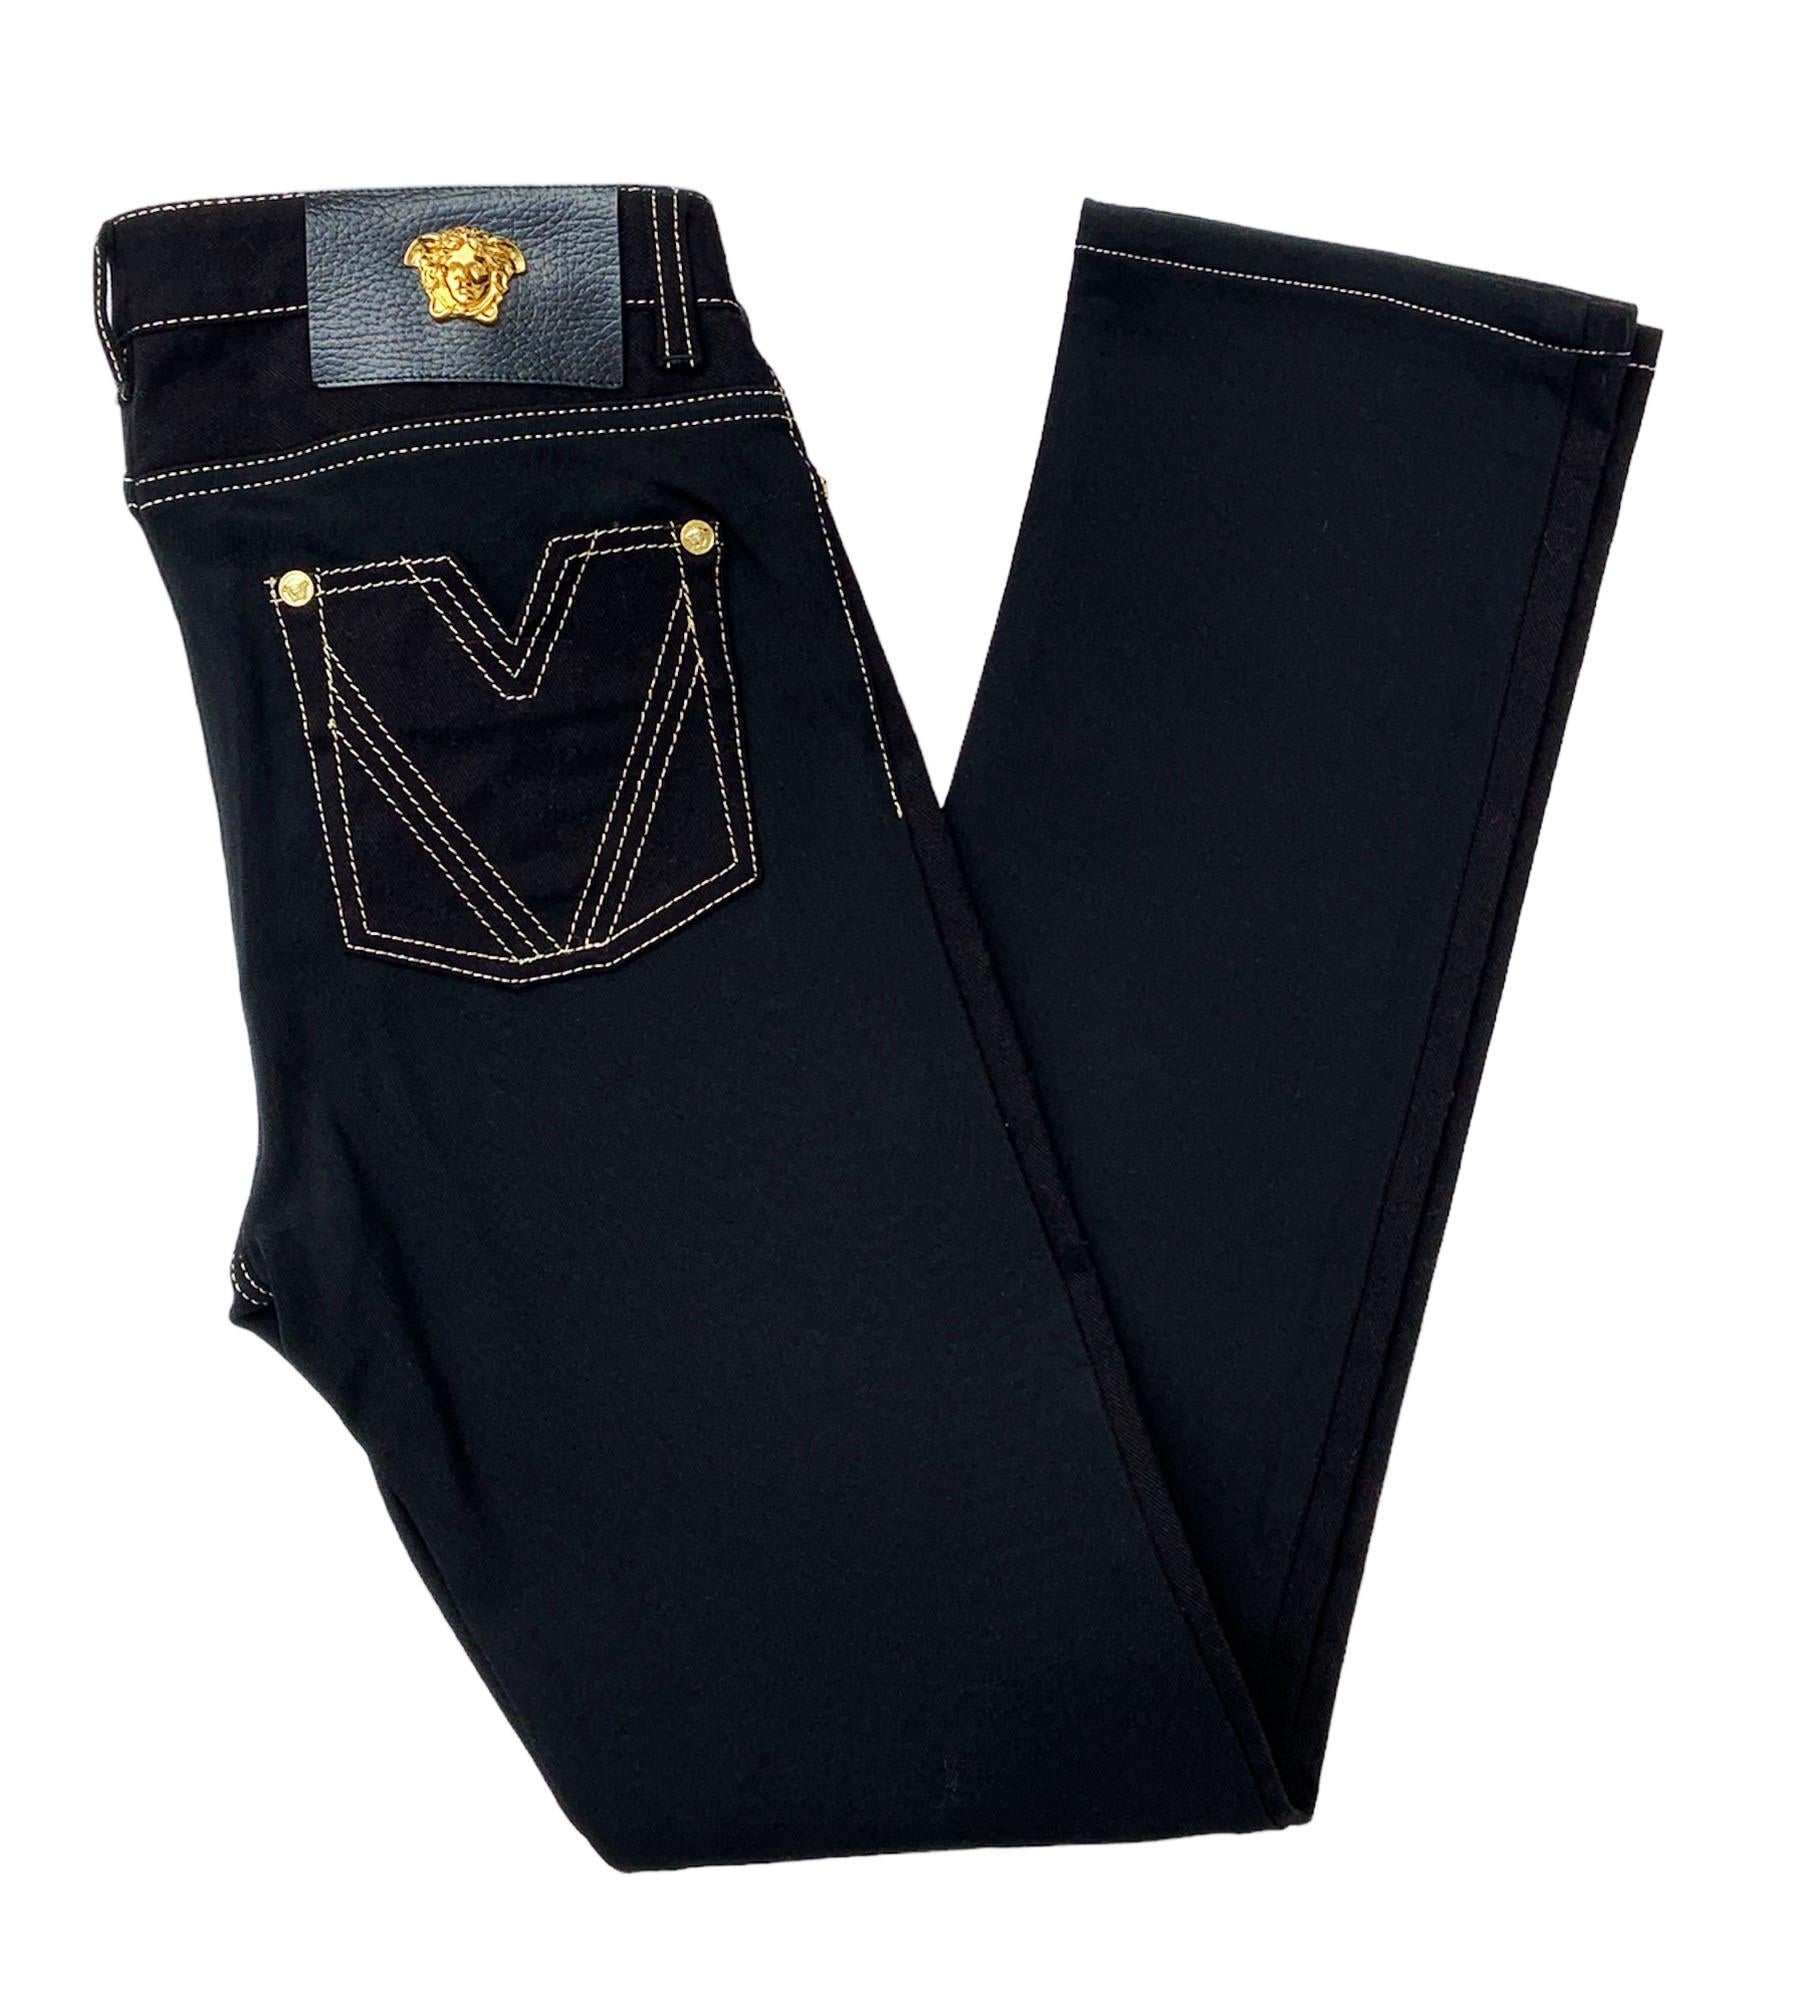 NWT Versace $2150 Black Gold Baroque Embroidery Stretch Jeans size 27 and 26 In New Condition For Sale In Montgomery, TX